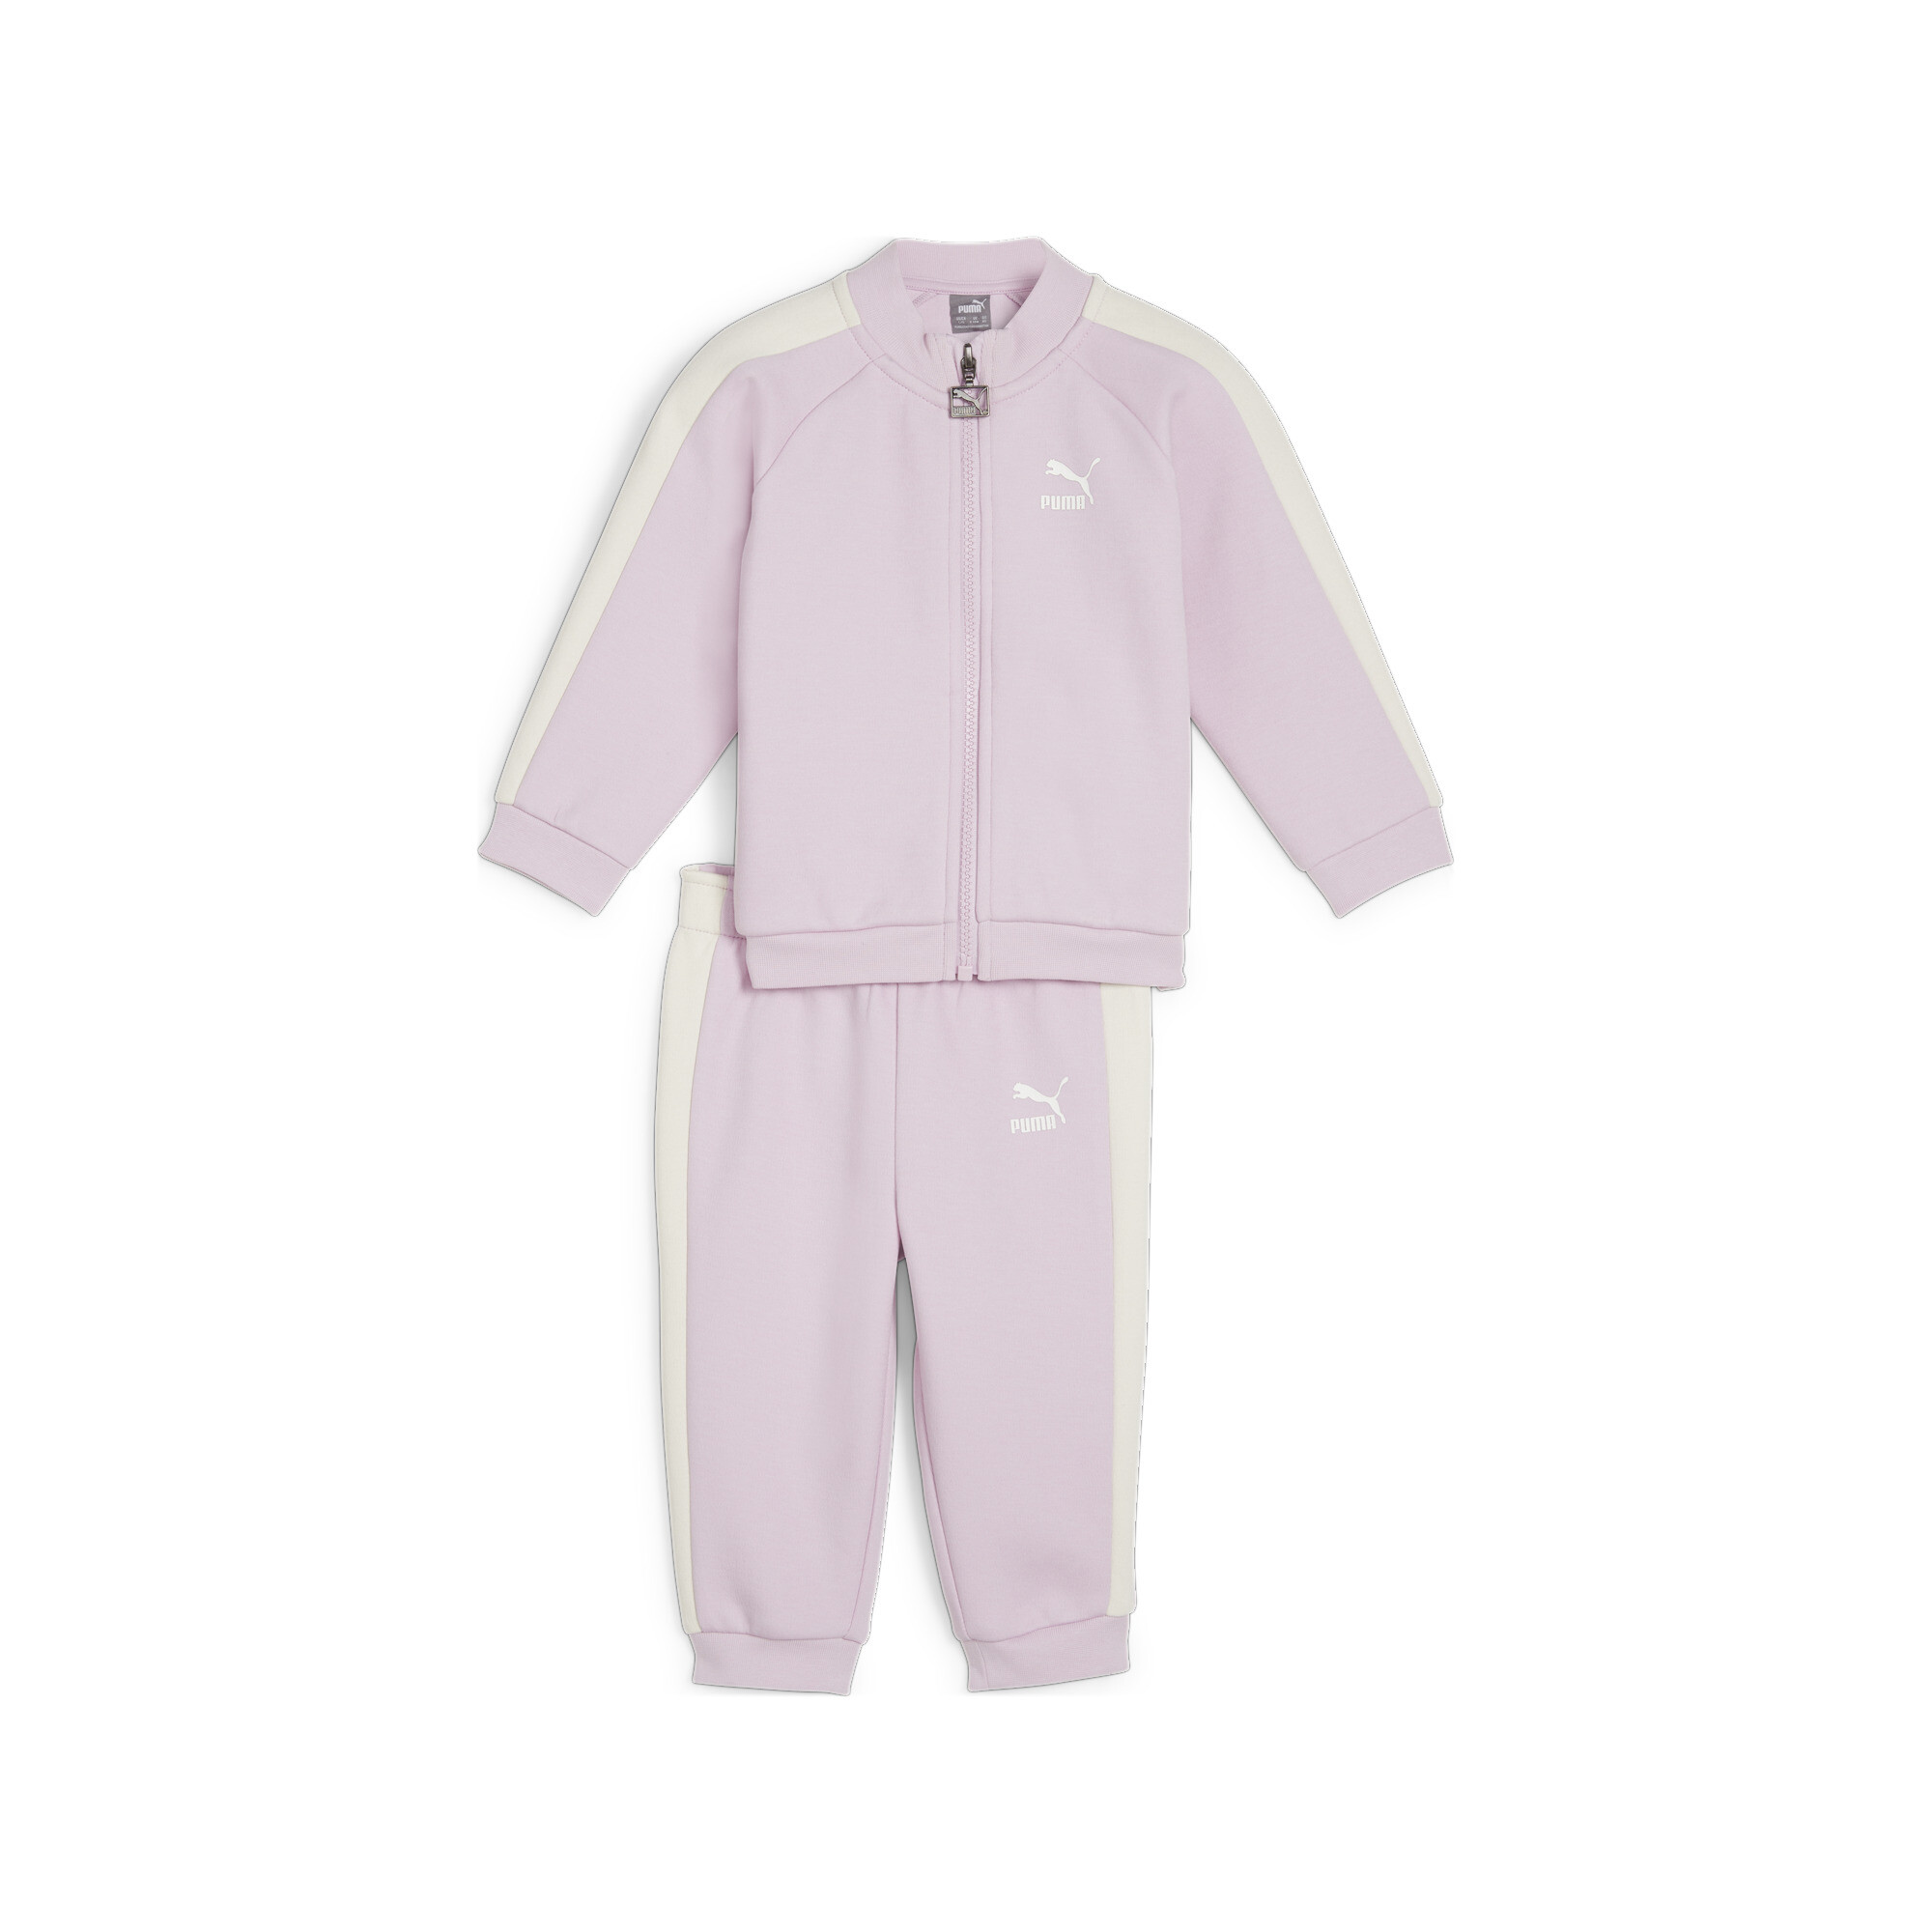 PUMA MINICATS T7 ICONIC Baby Tracksuit Set In 90 - Purple, Size 1-2 Youth